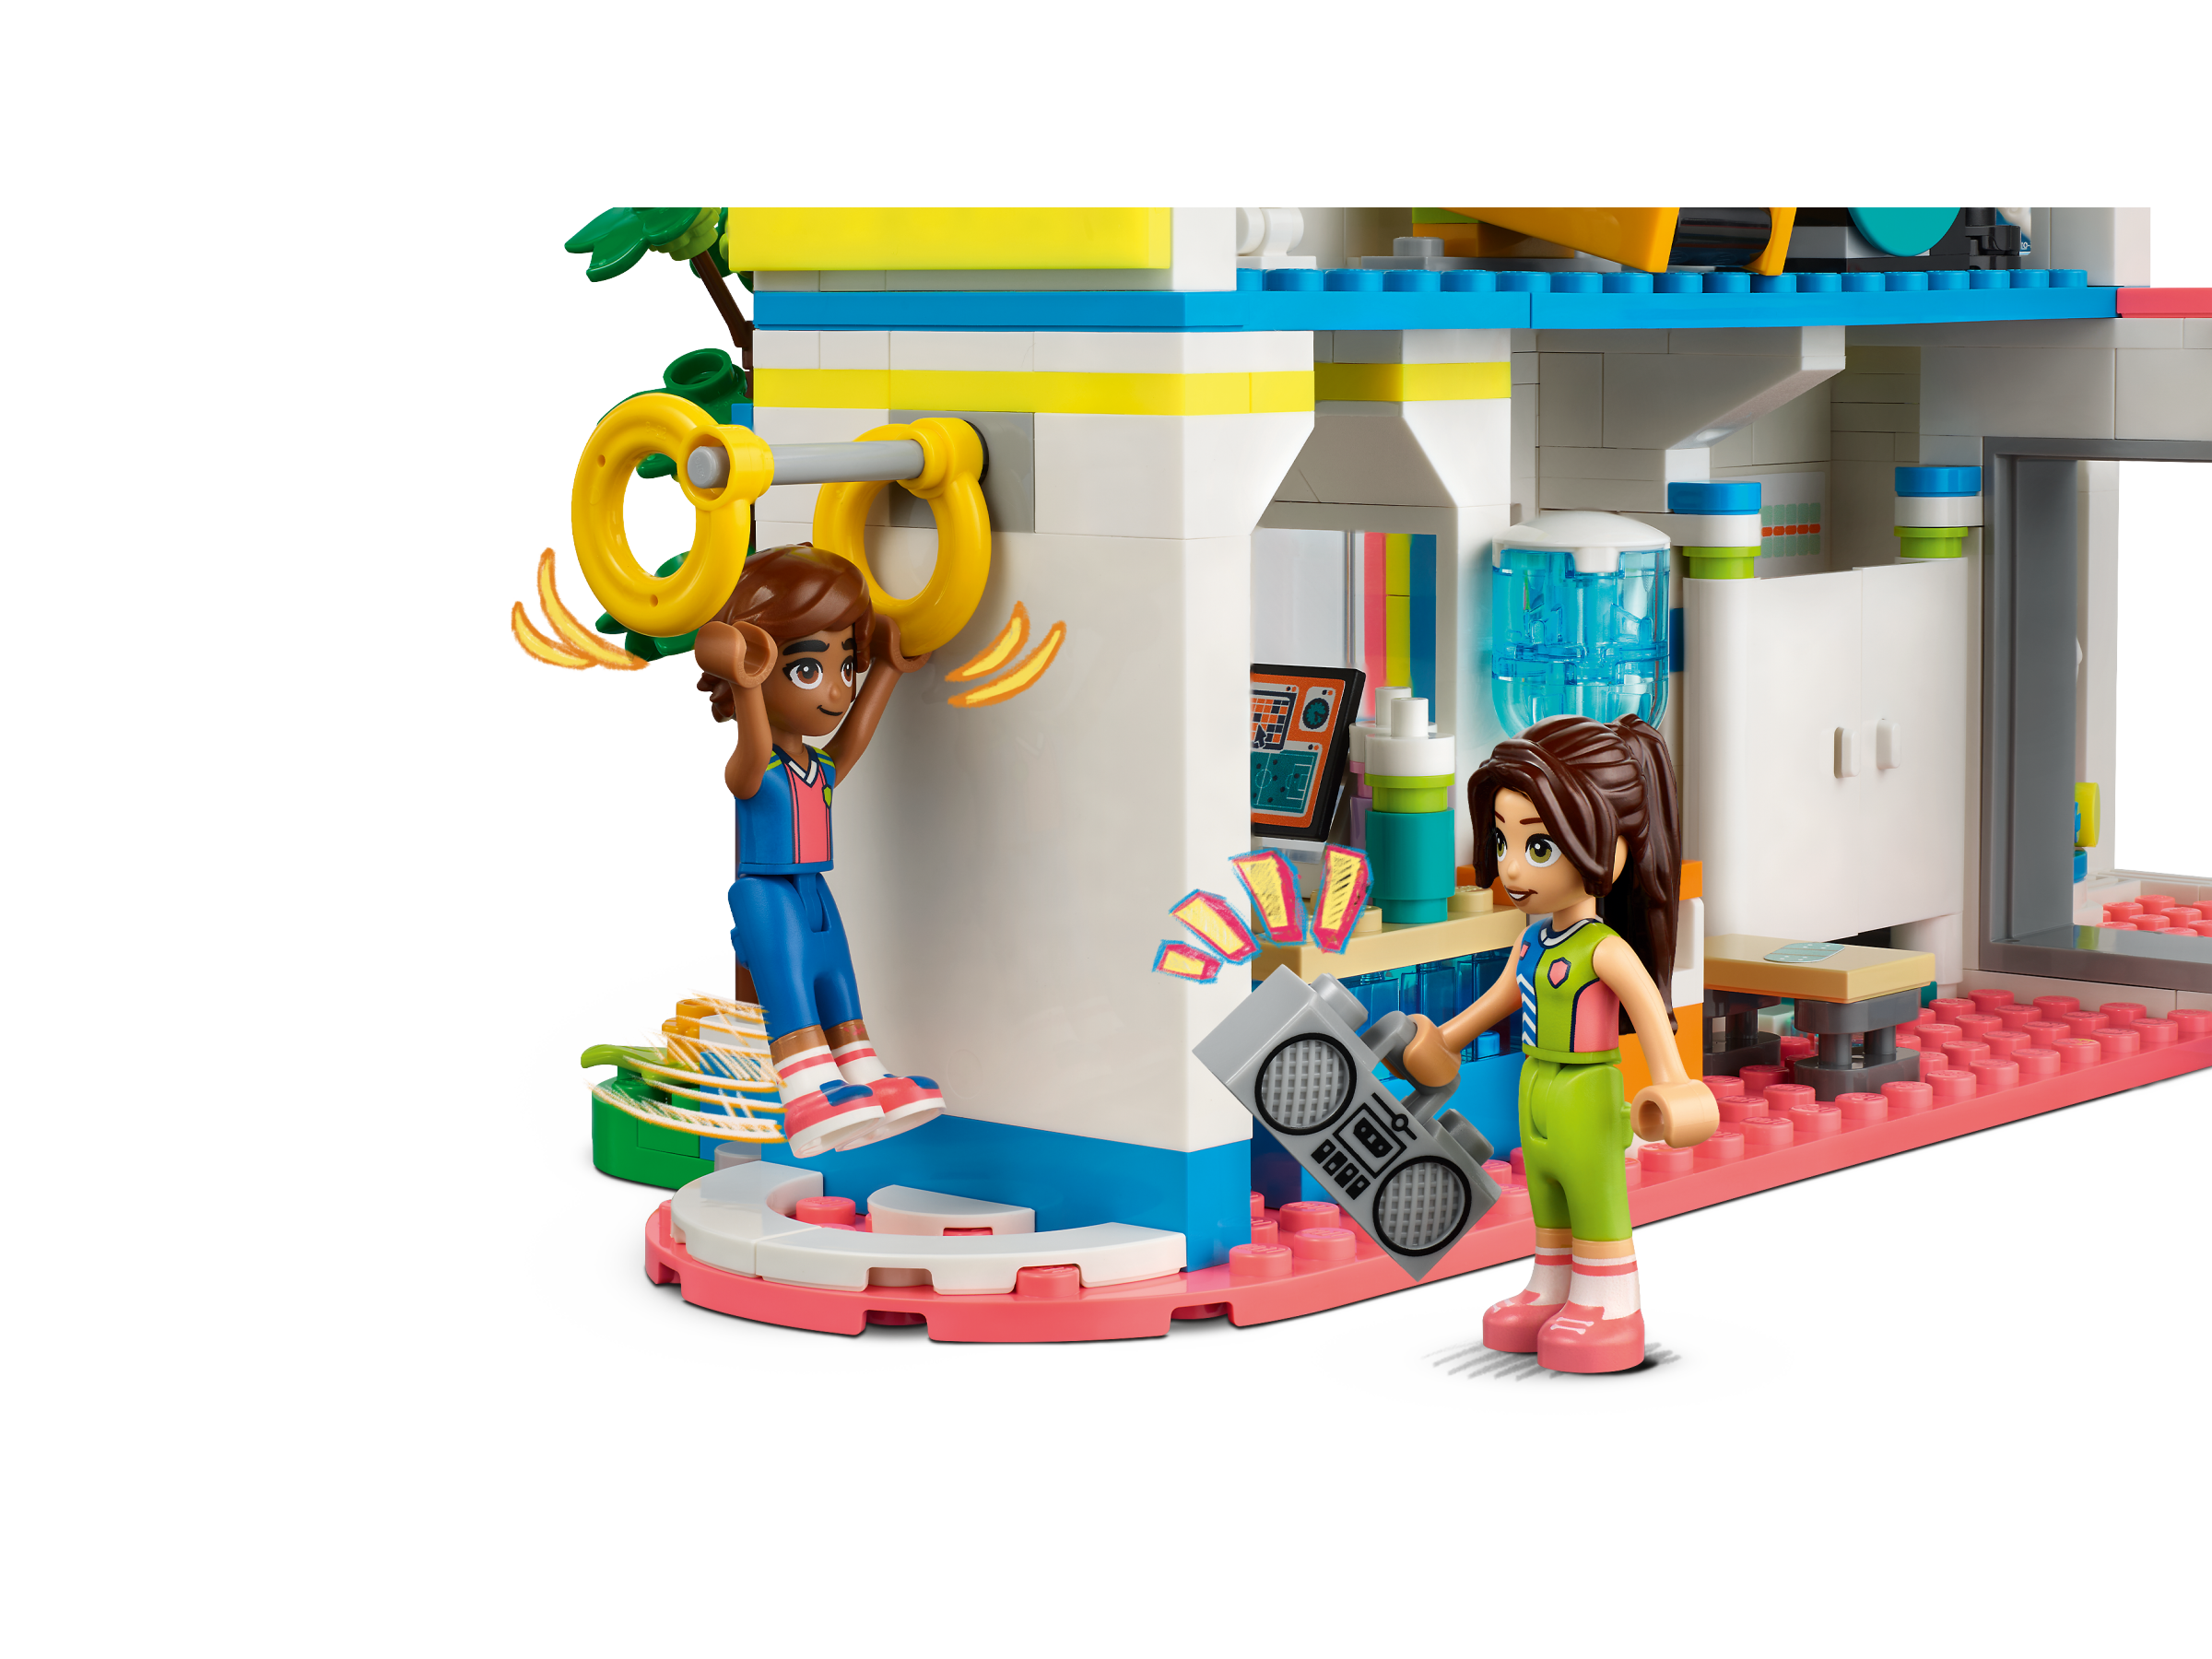 Sports Center 41744 | Friends | Buy online at the Official LEGO® Shop US